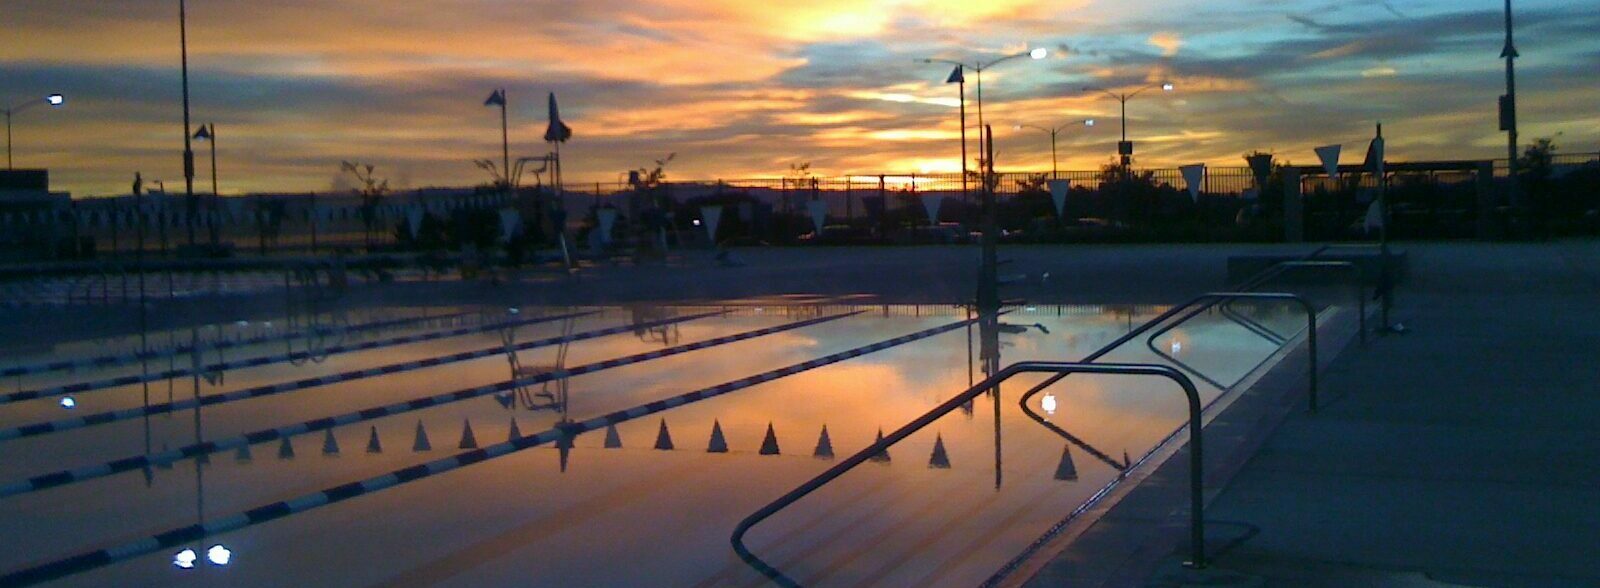 pool with sunset at college of san mateo athletic center